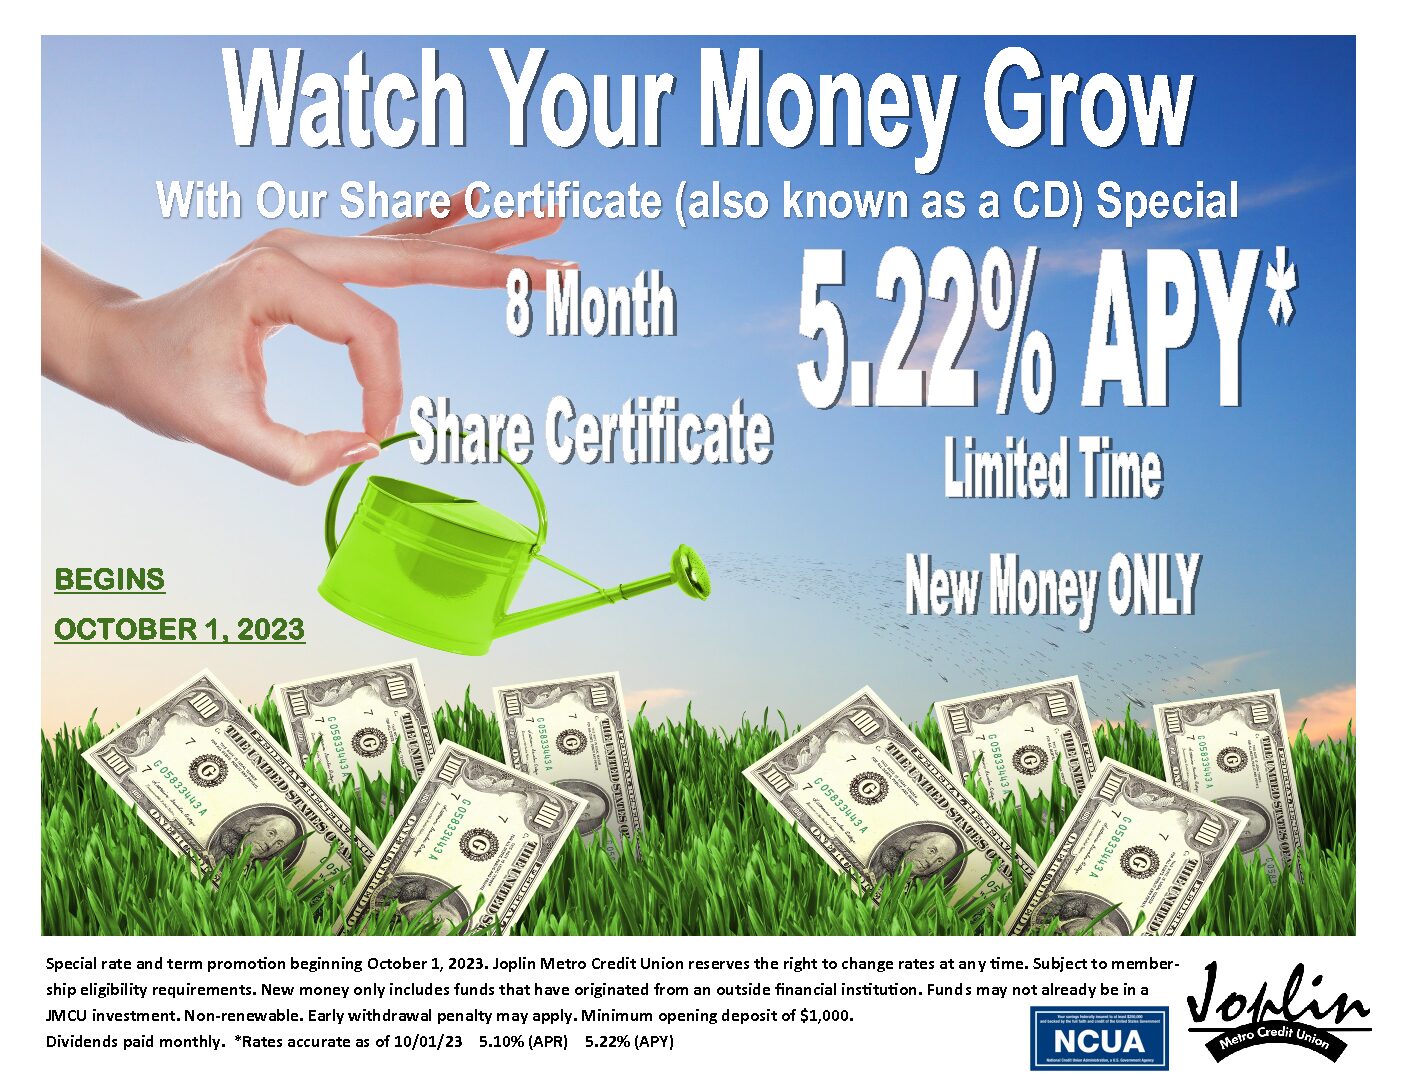 8-MONTH CERTIFICATE SPECIAL